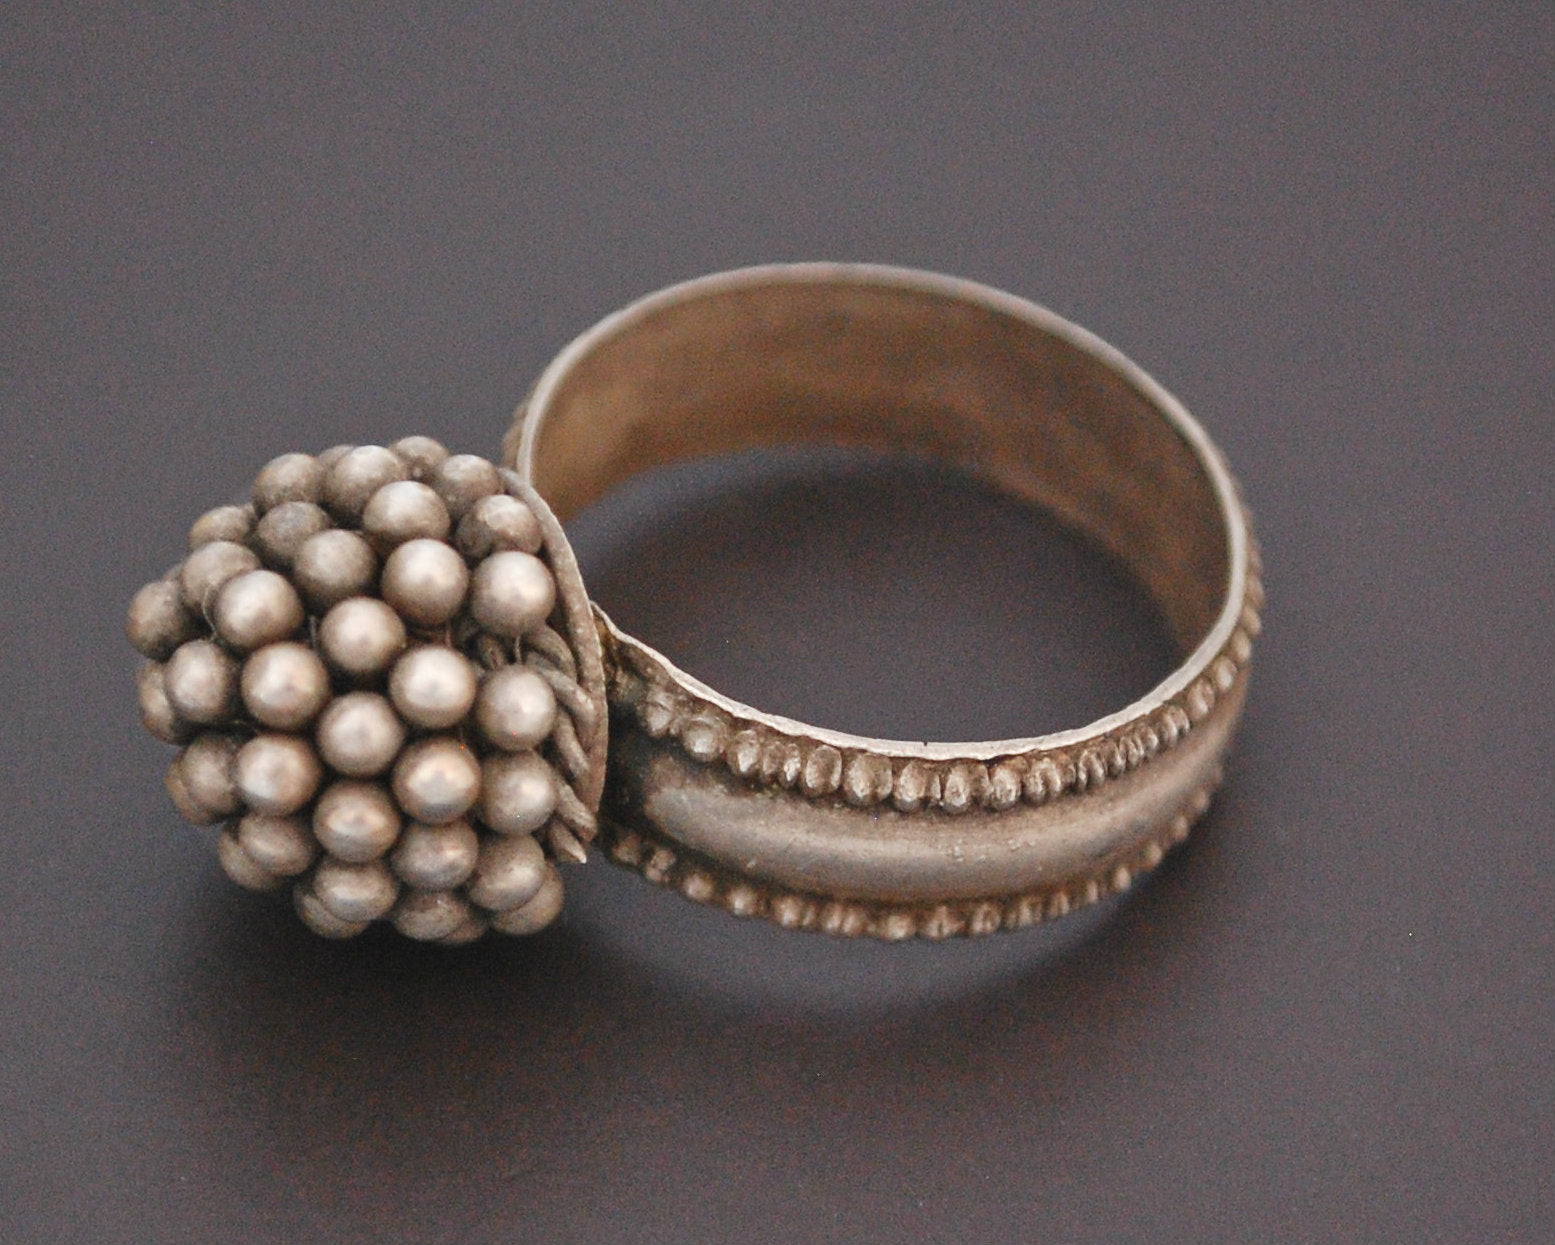 Tribal Rajasthani Silver Ring with Bells - Size 9